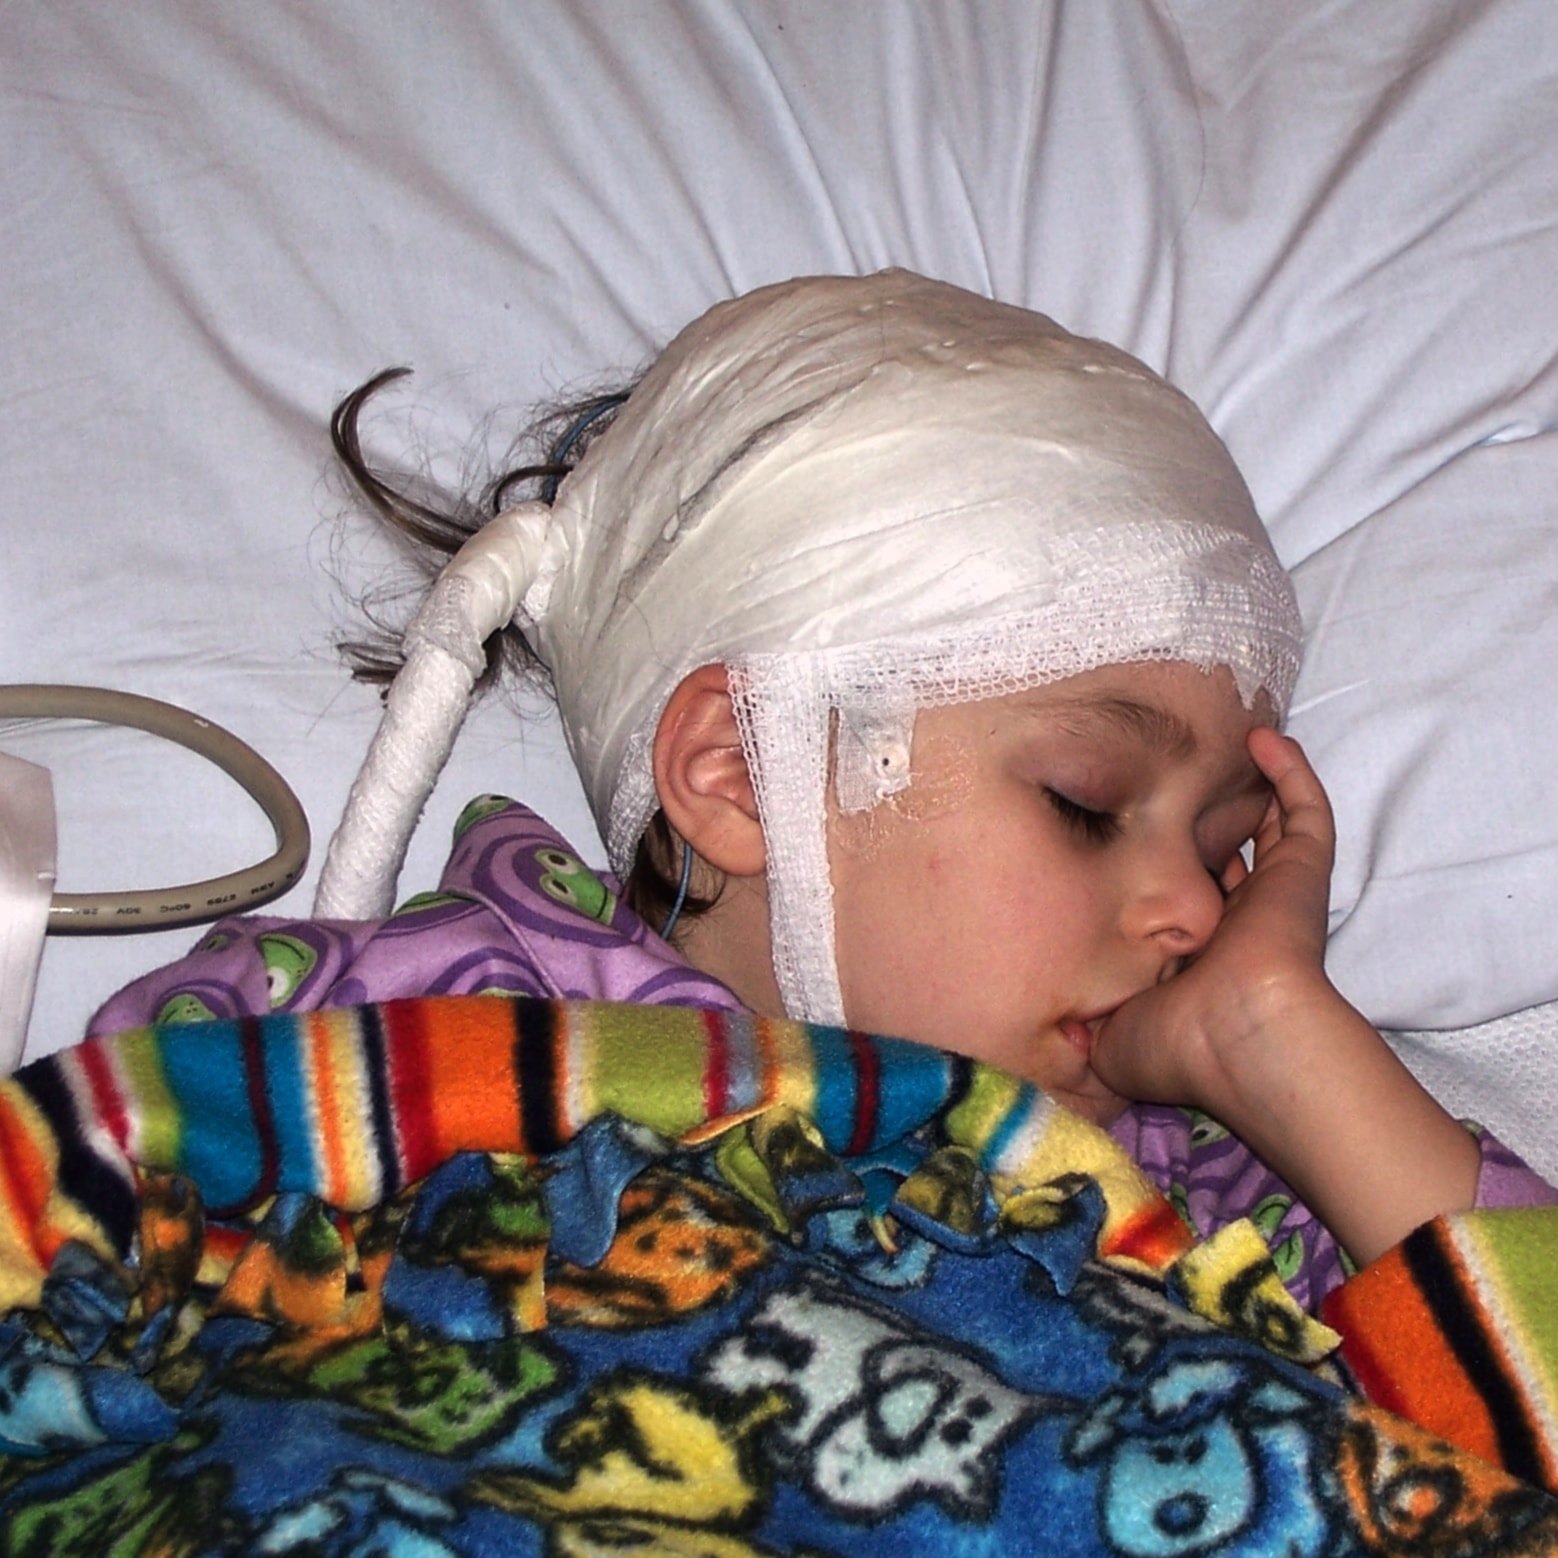 girl sucking thumb during eeg with head wrapped in white gauze